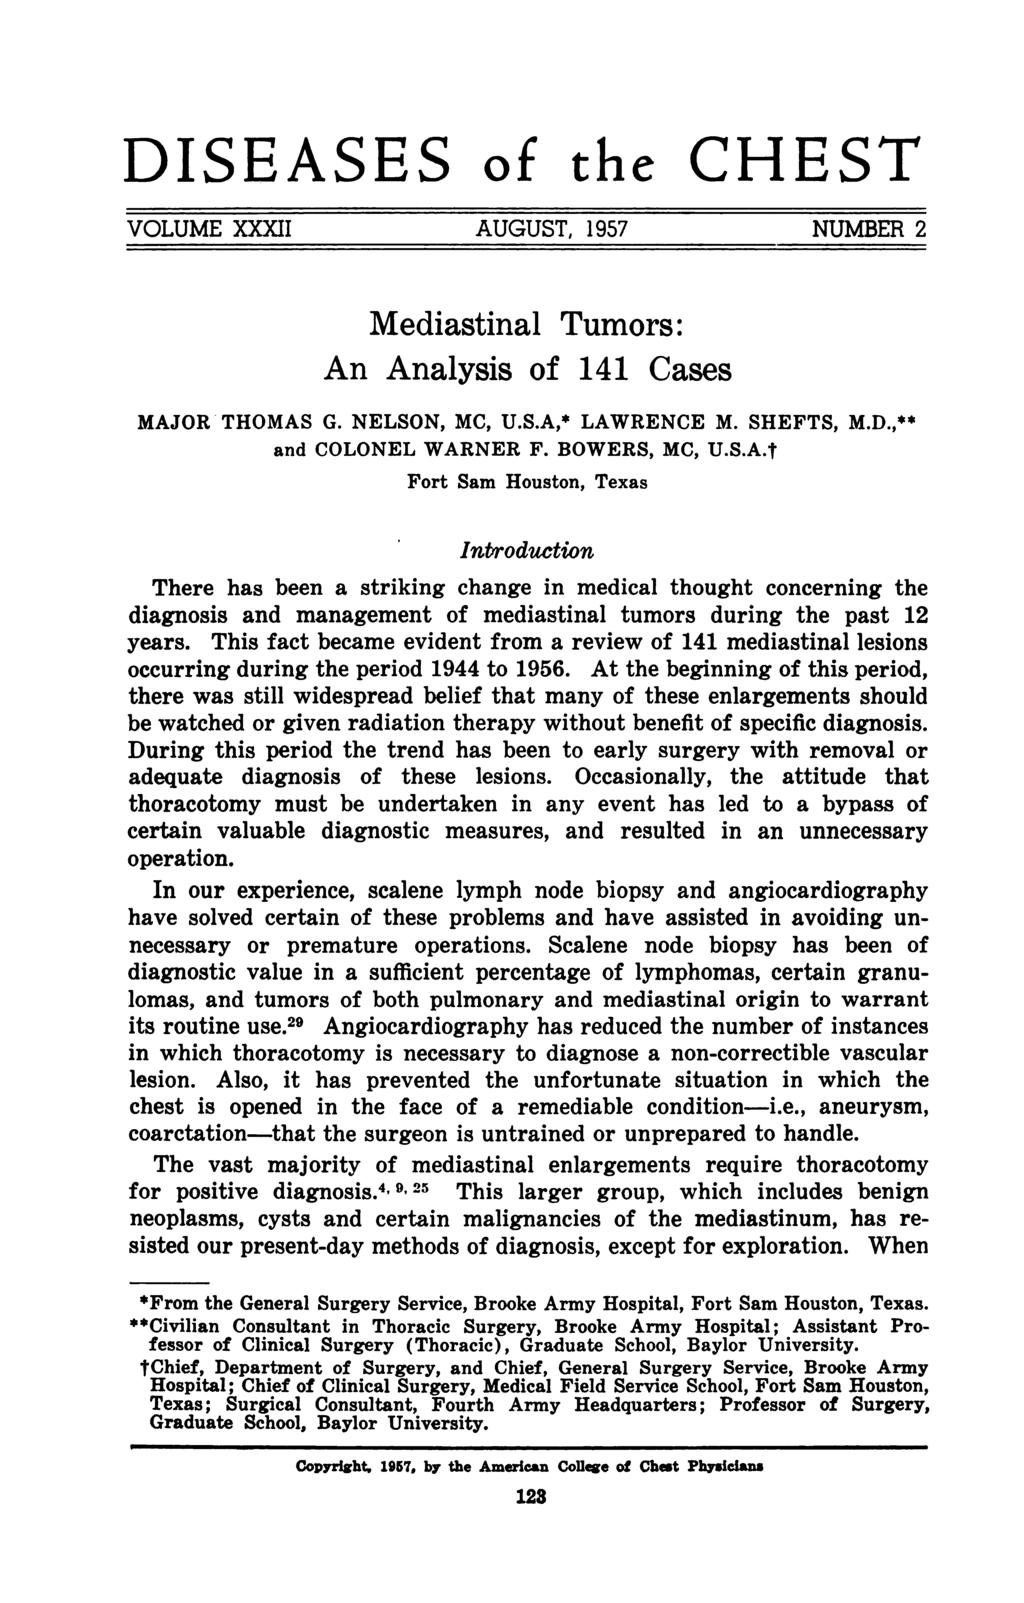 DISEASES of the CHEST VOLUME XXXII AUGUST, 1957 NUMBER 2 Mediastinal Tumors: An Analysis of 141 Cases MAJOR"THOMAS G. NELSON, MC, U.S.A, LAWRENCE M. SHEFTS, M.D., and COLONEL WARNER F. BOWERS, MC, U.